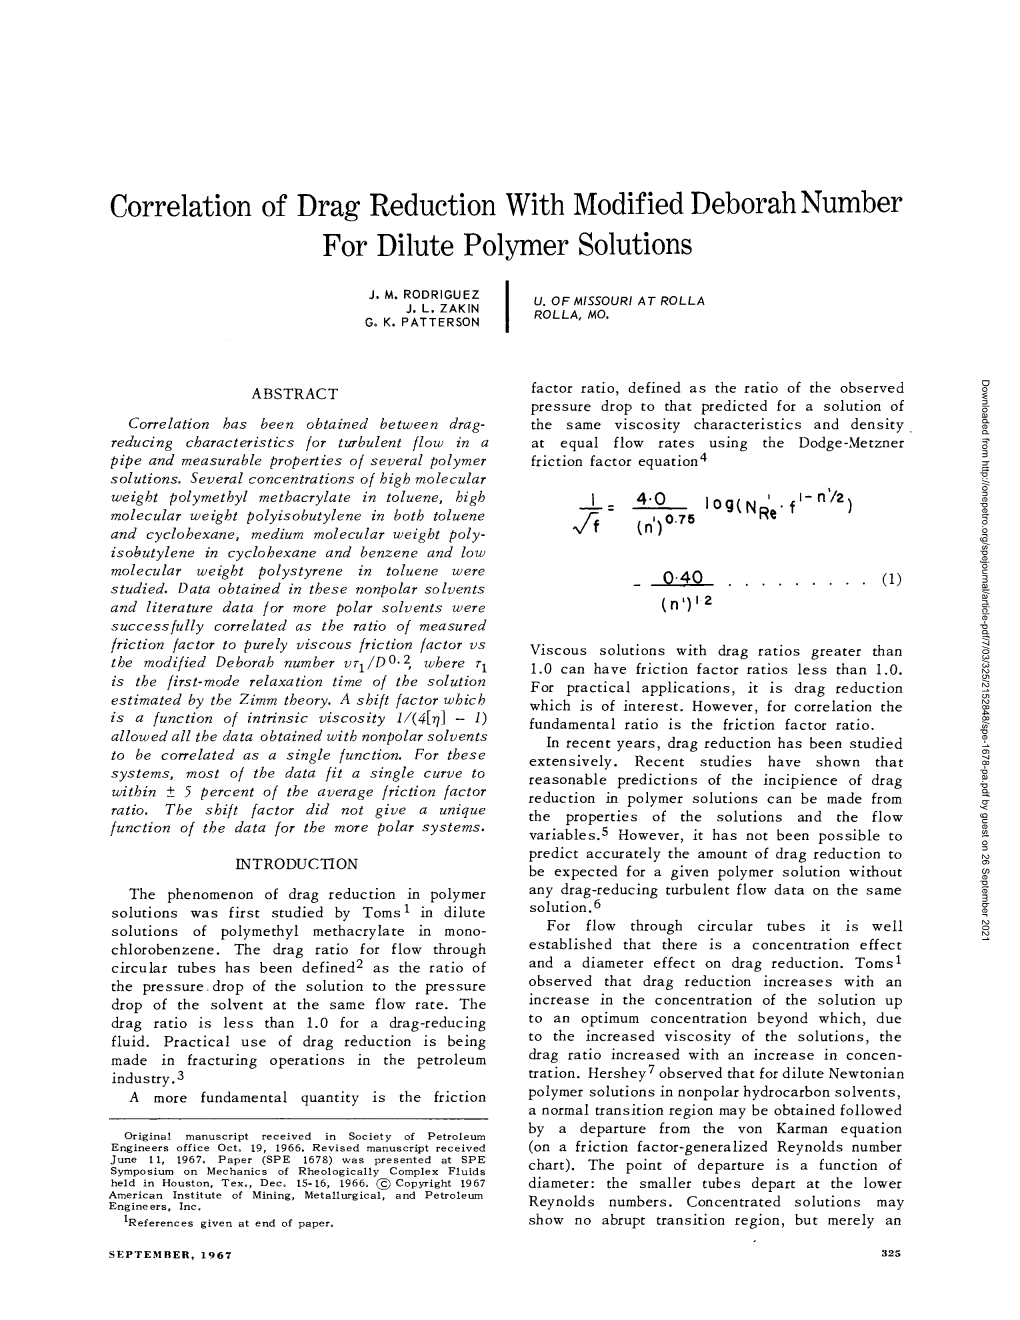 Correlation of Drag Reduction with Modified Deborah Number for Dilute Polymer Solutions